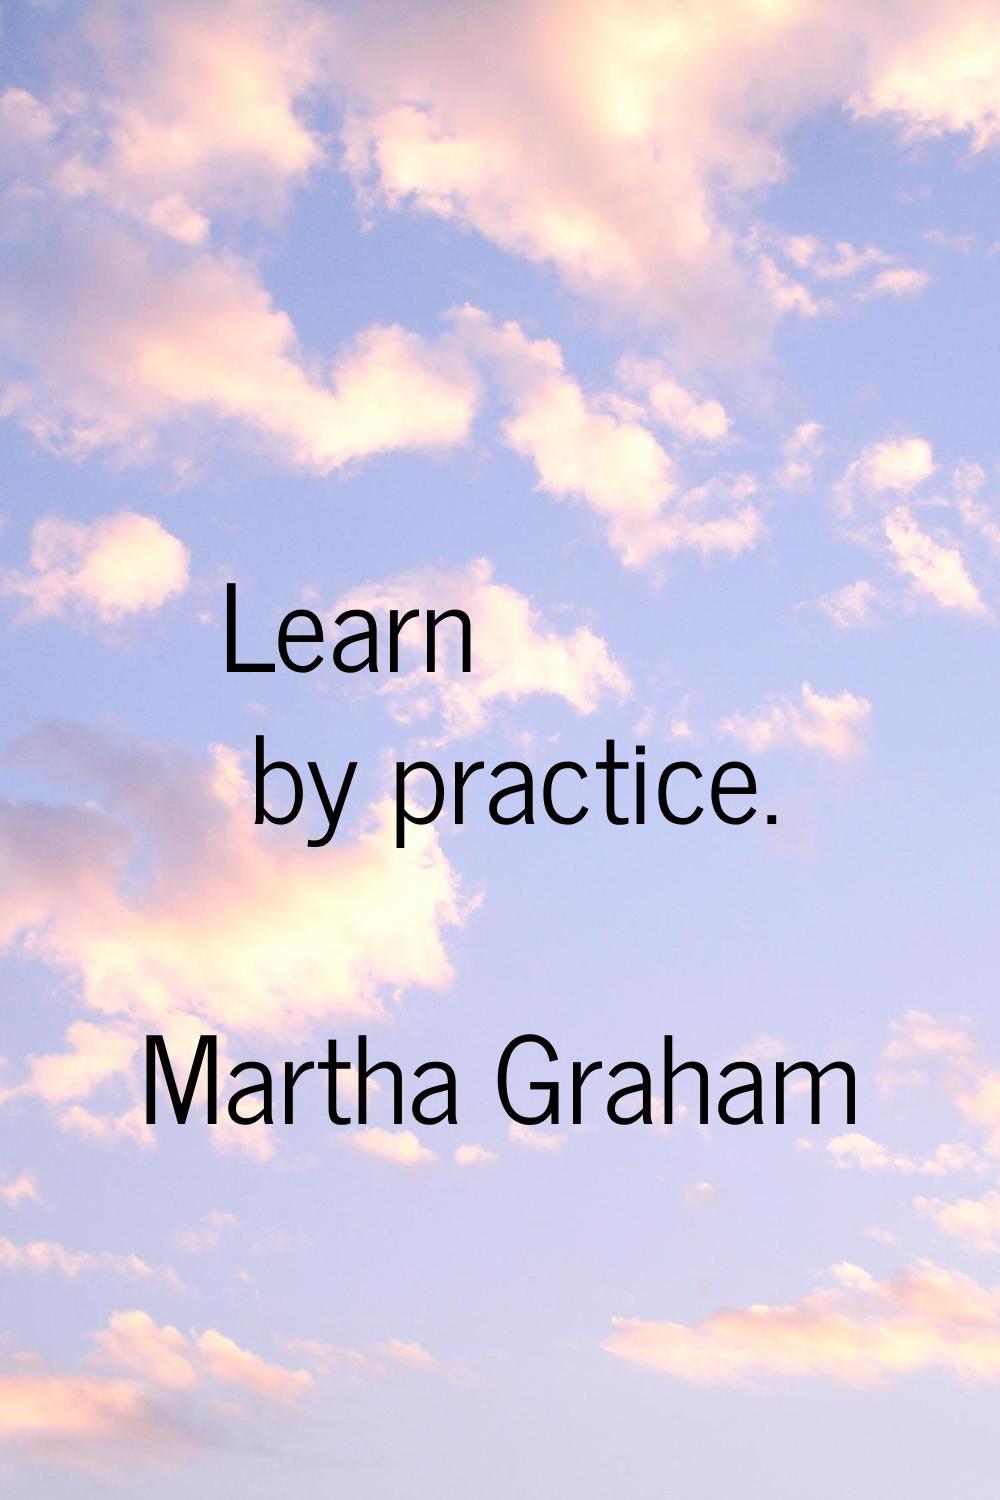 Learn by practice.